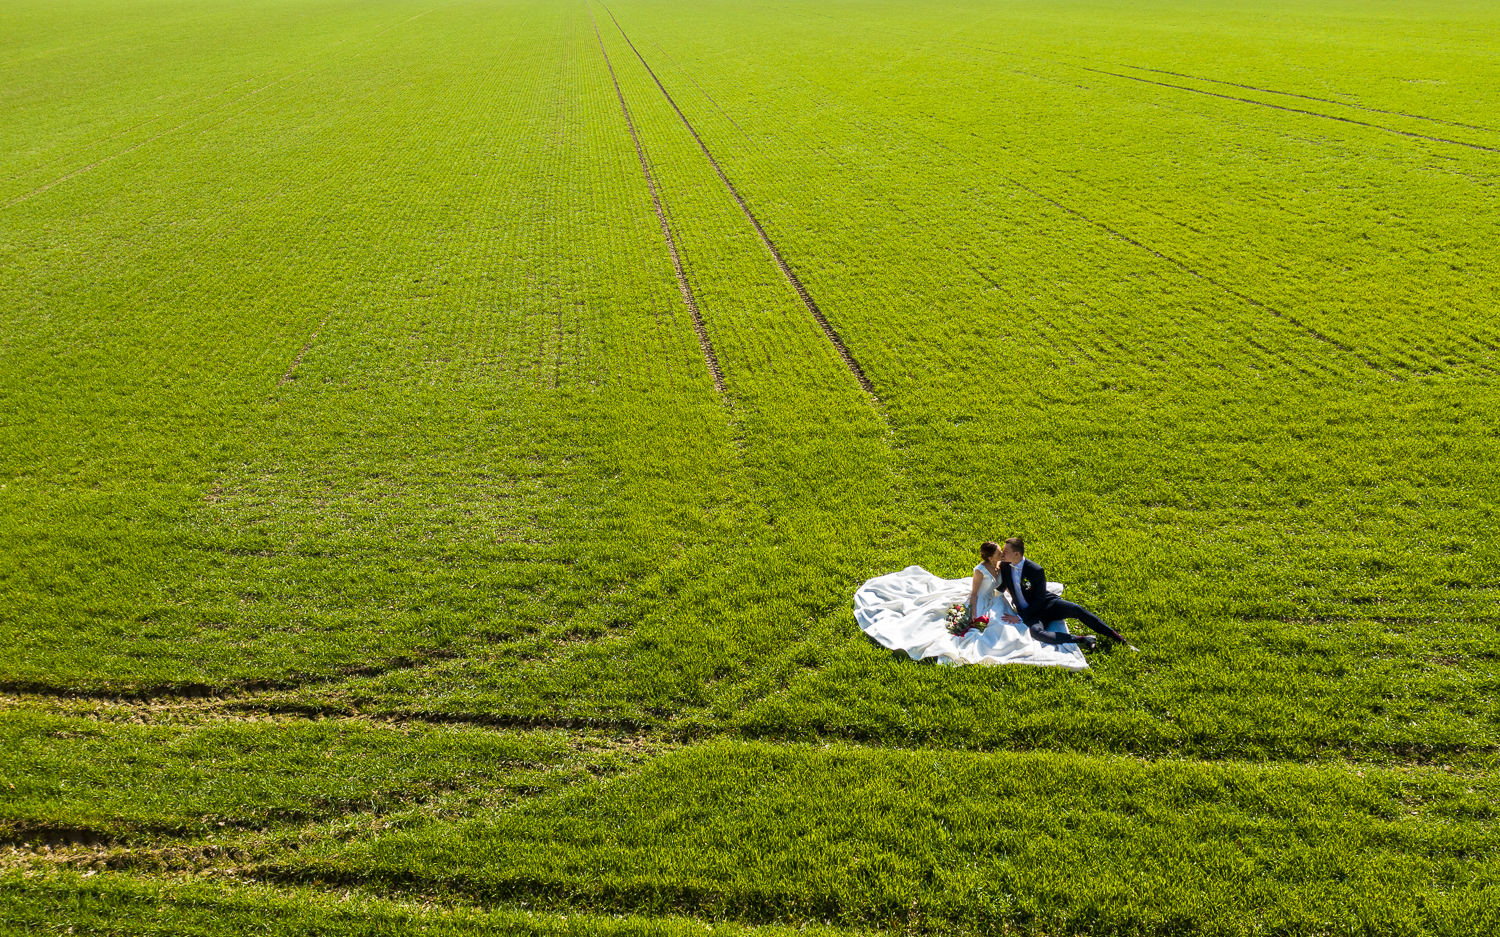 Wedding drone photography in the endless fields